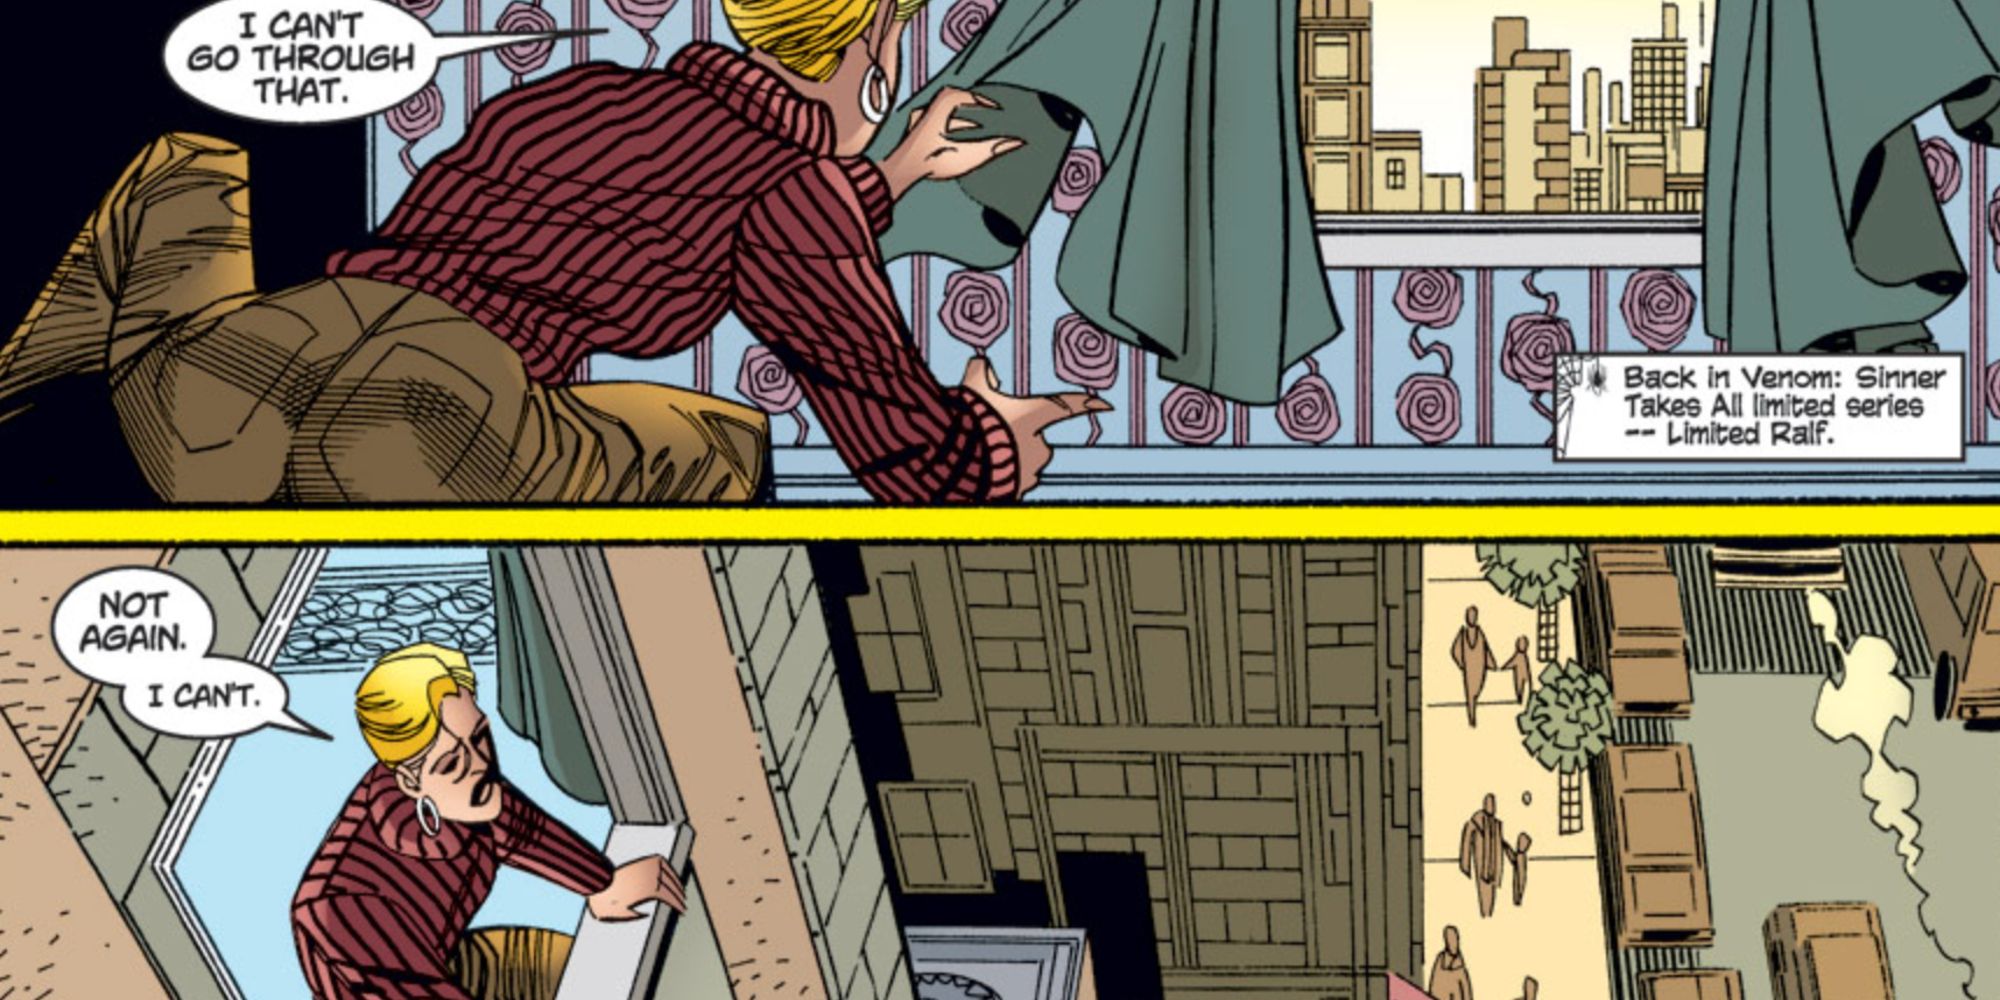 Anne Weying getting ready to jump out a window in The Amazing Spider-Man Vol. 2 #19